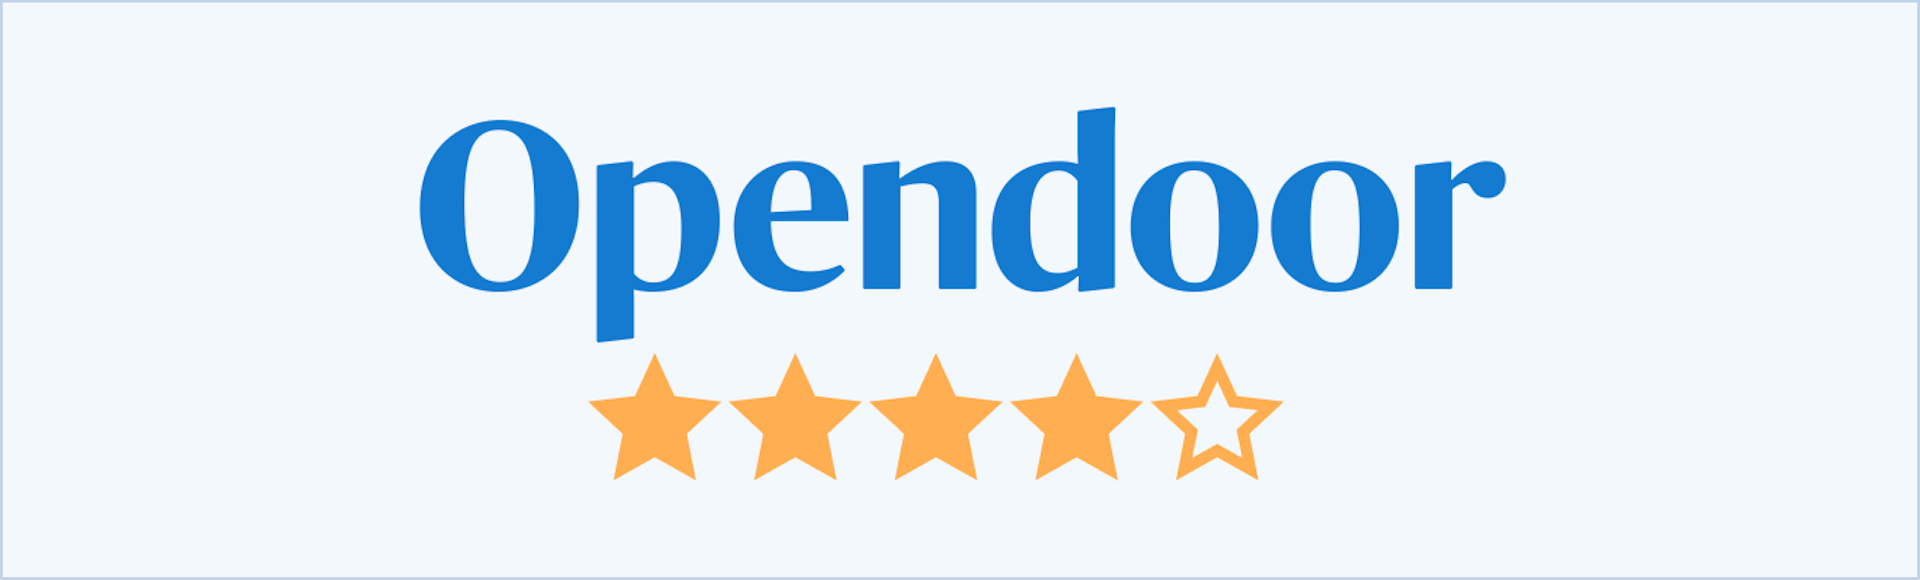 Opendoor Reviews Our iBuyer Expert’s Take